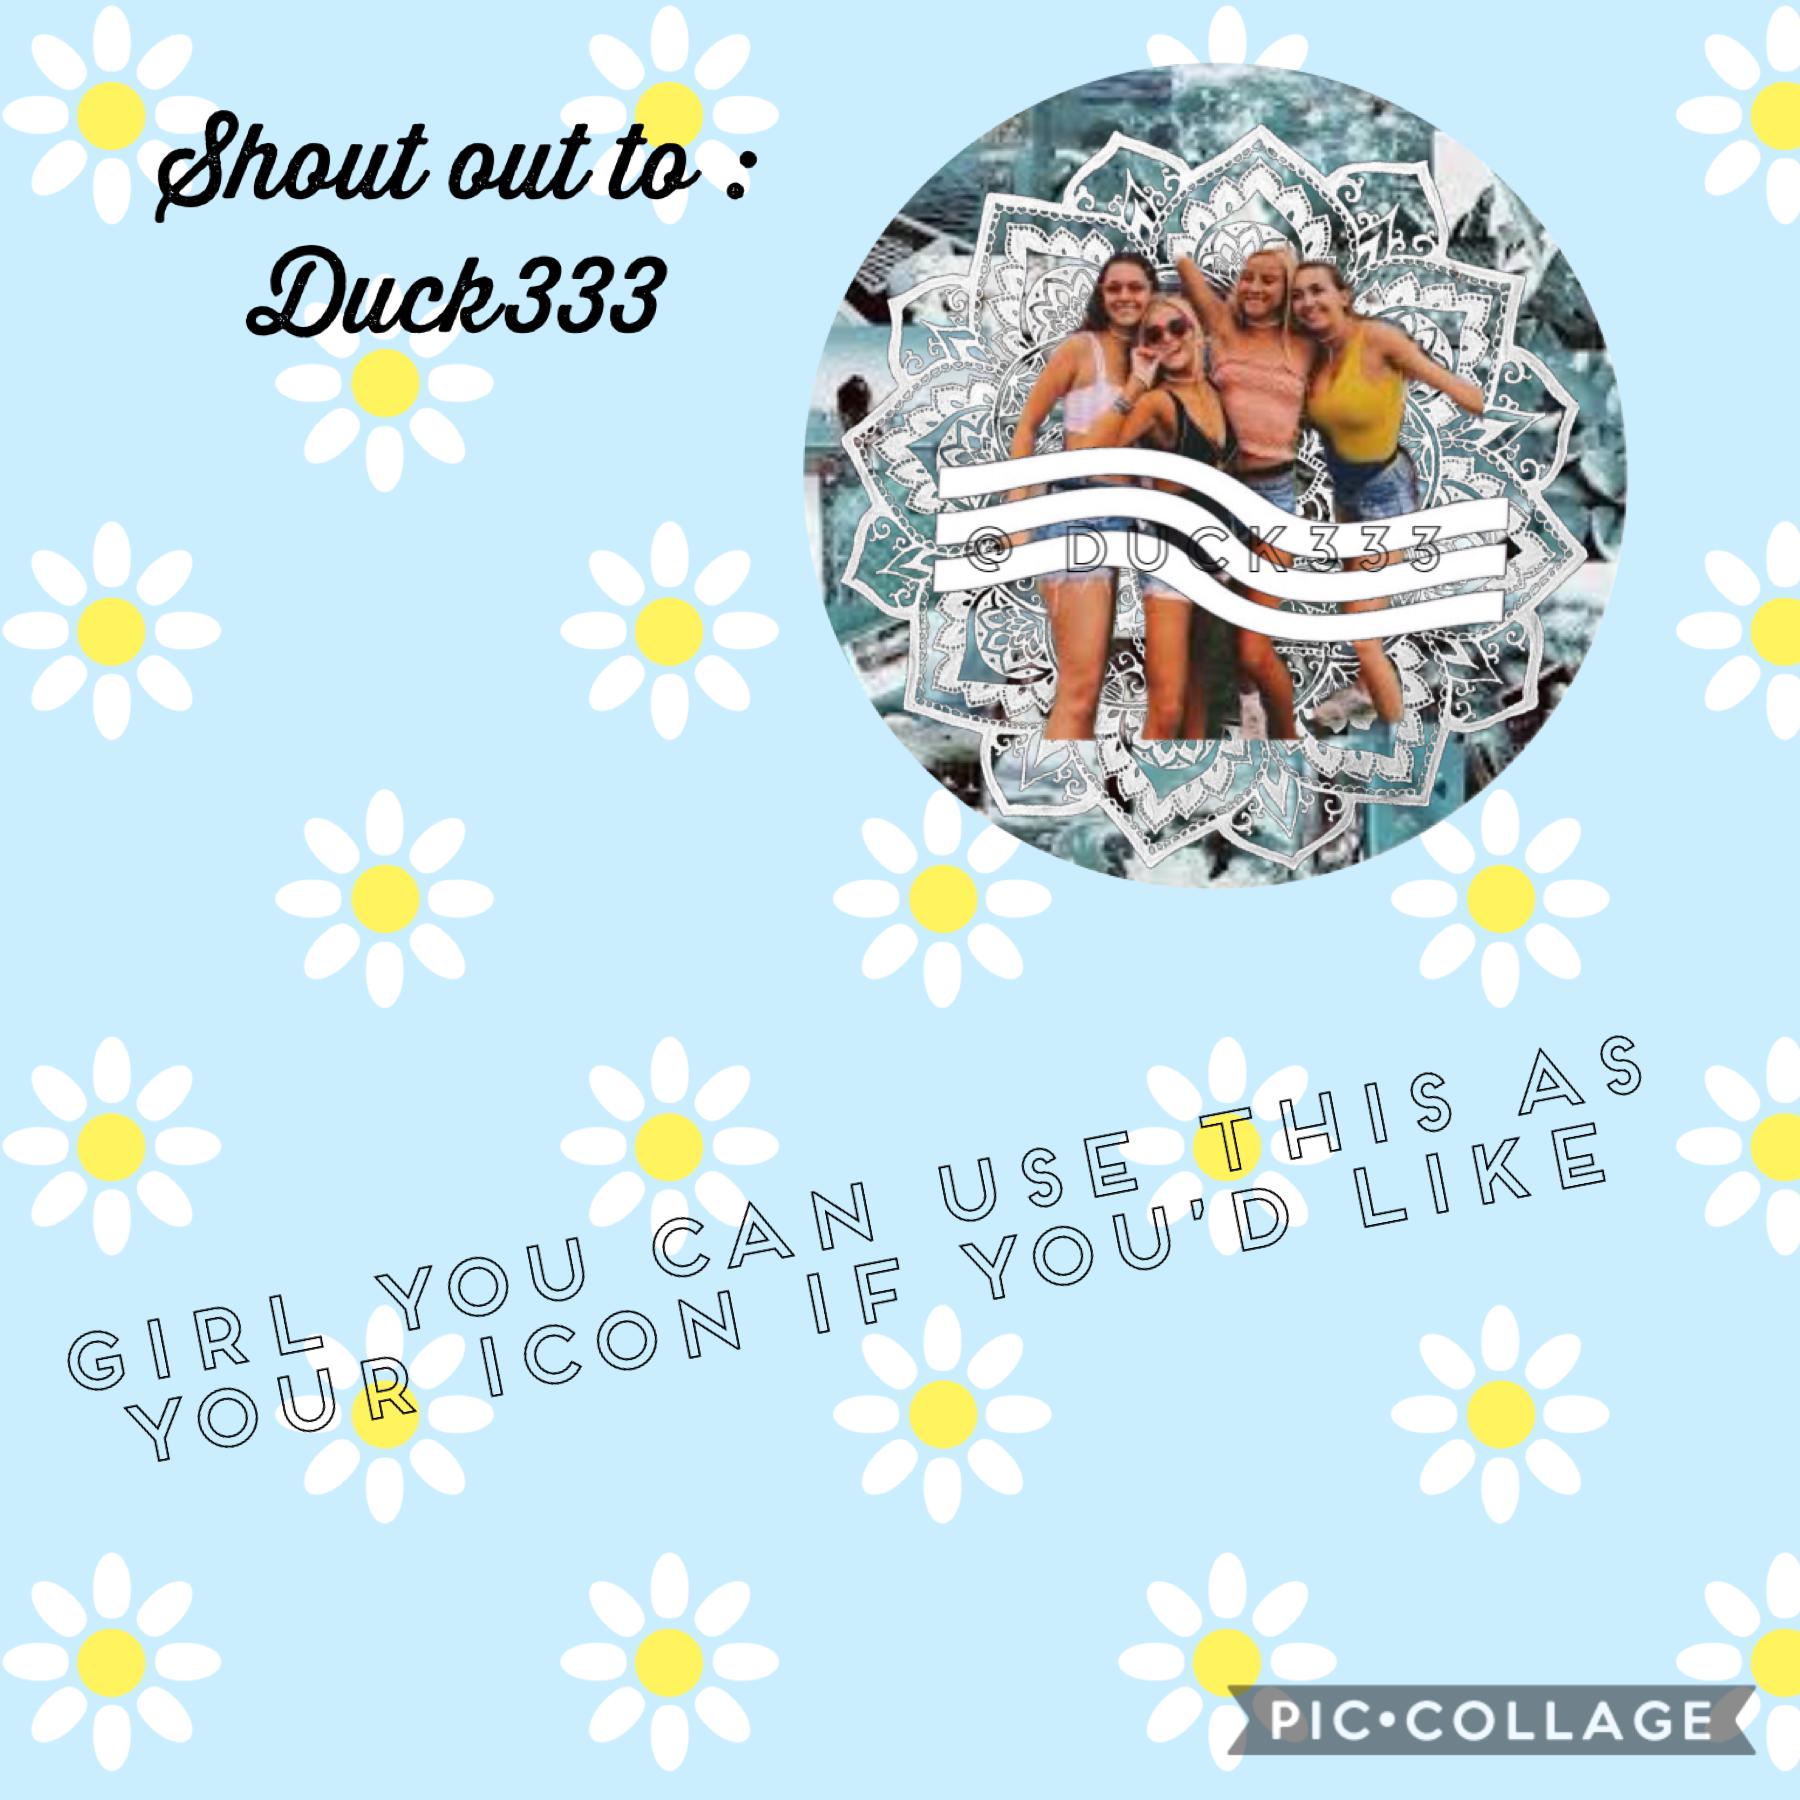 Duck333 I love her 😍 